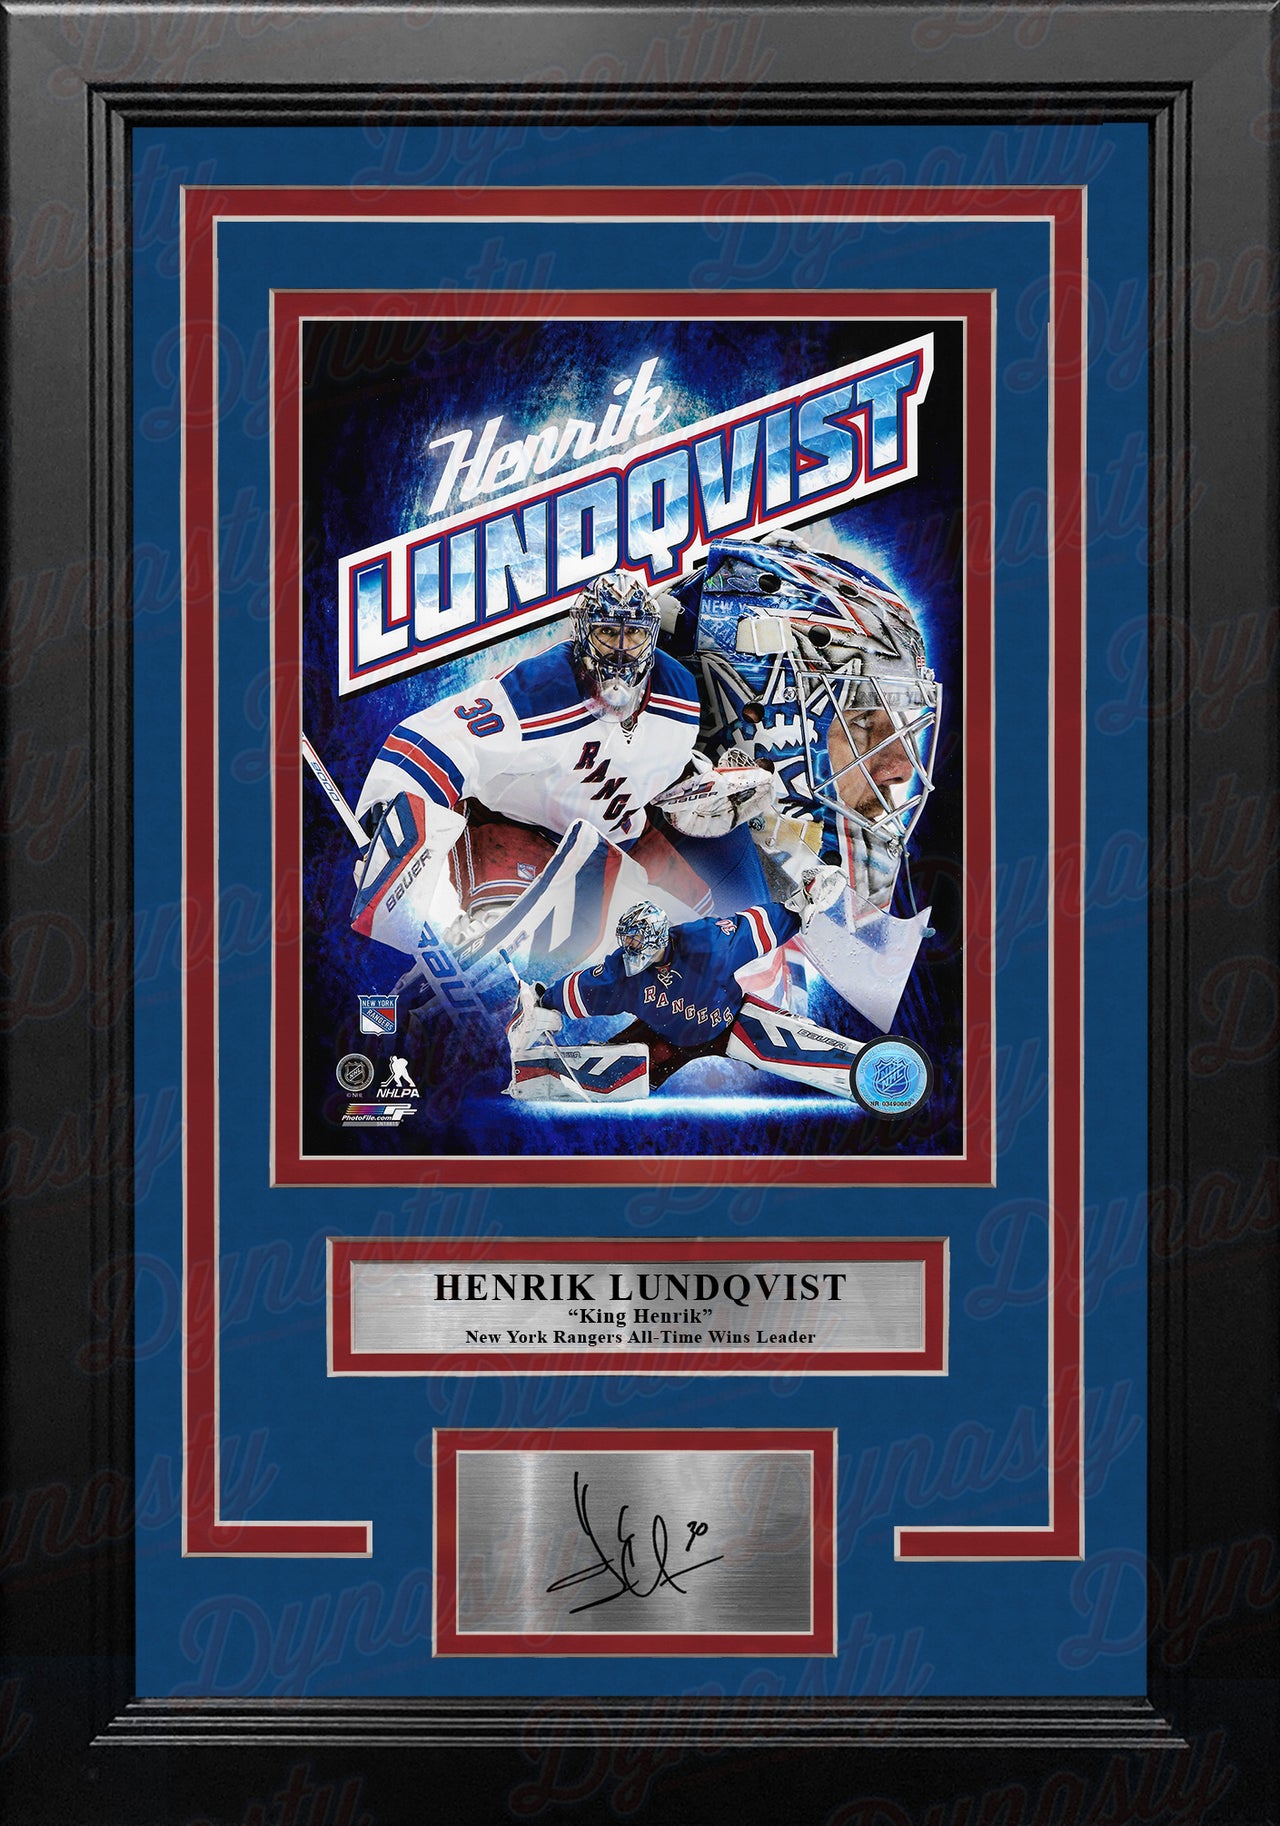 Henrik Lundqvist New York Rangers 8" x 10" Framed Hockey Collage Photo with Engraved Autograph - Dynasty Sports & Framing 